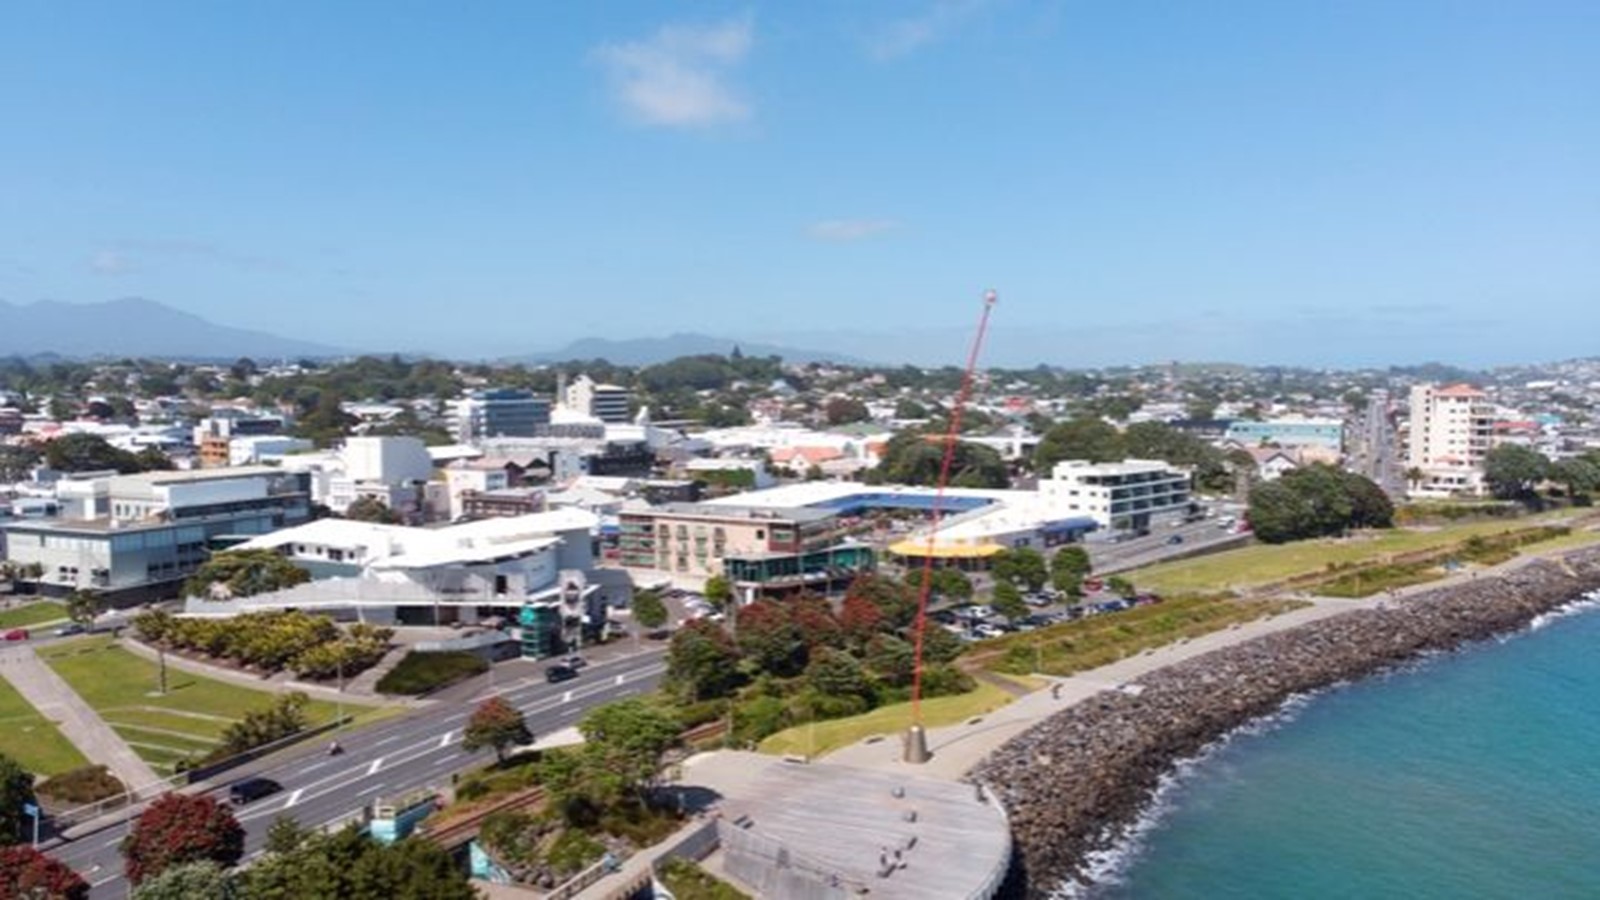 Image of New Plymouth from the air